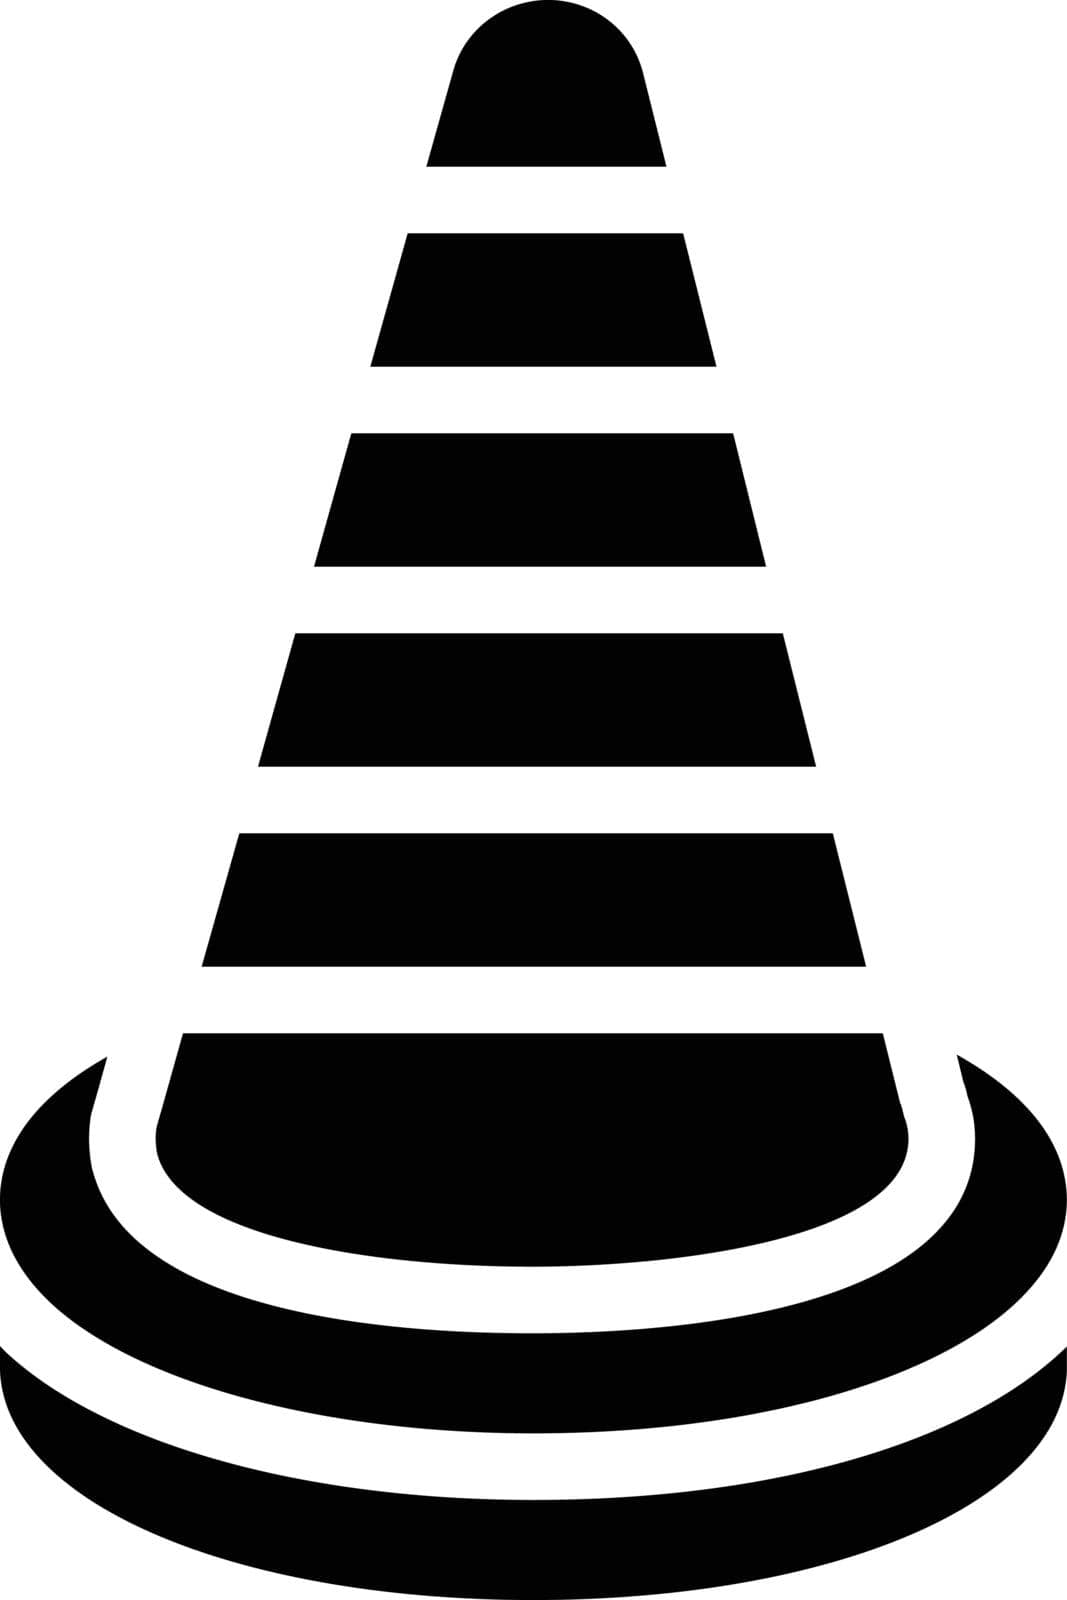 cone Vector illustration on a transparent background. Premium quality symmbols. Glyphs vector icons for concept and graphic design.